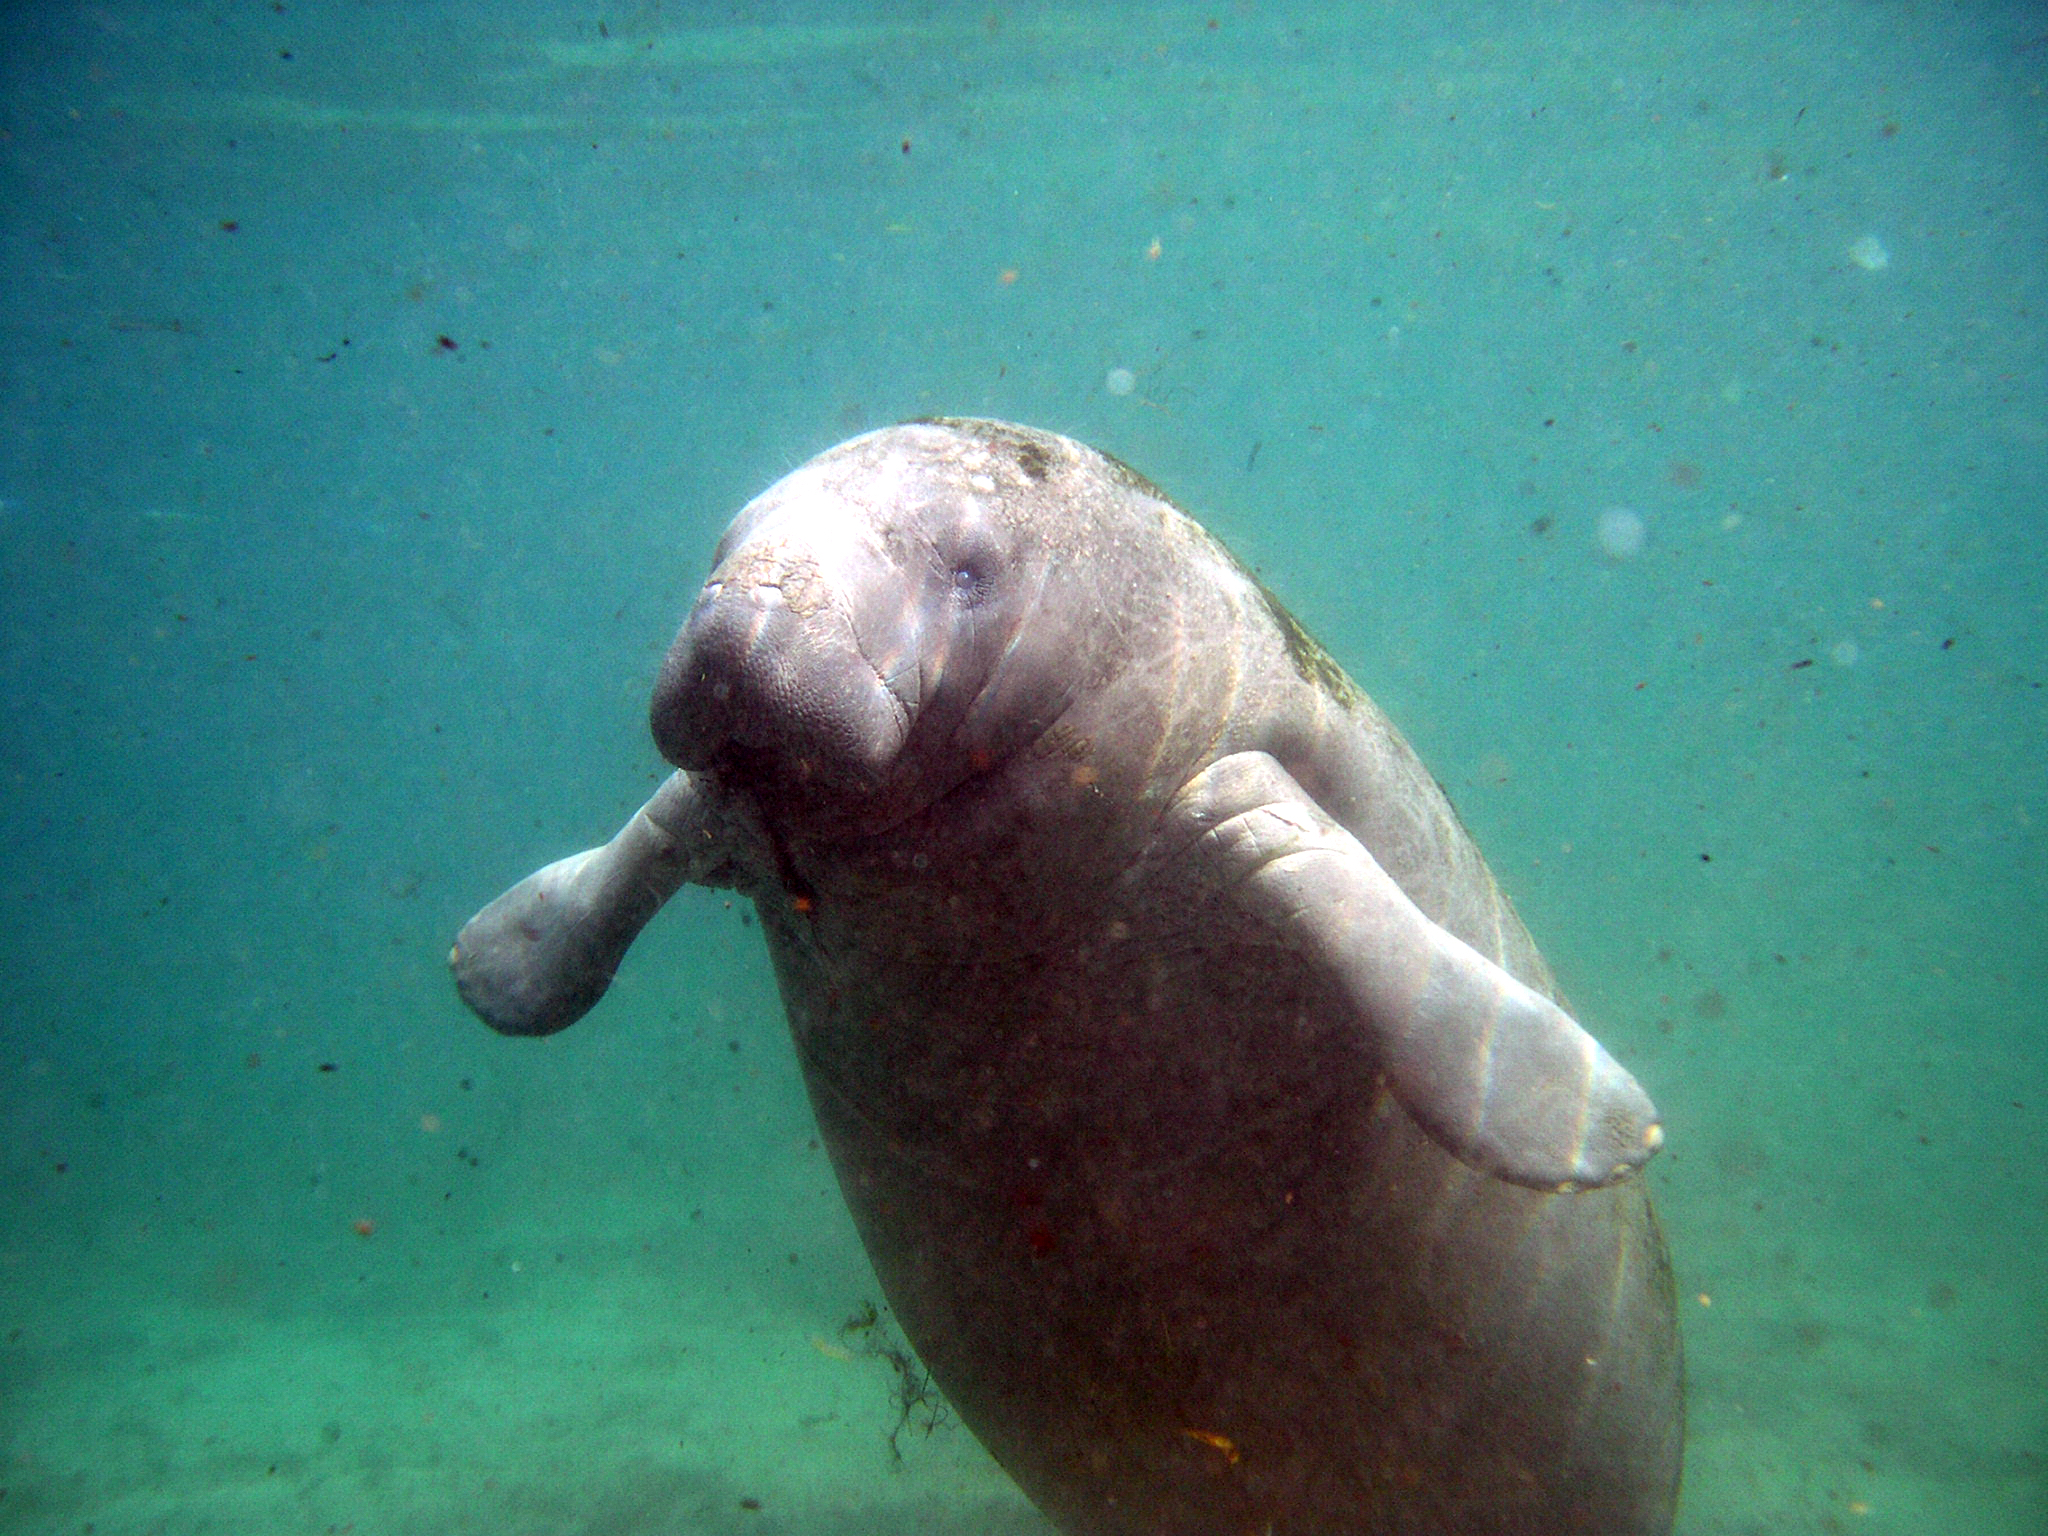 Crystal river baby manatee photo by Jesse L.